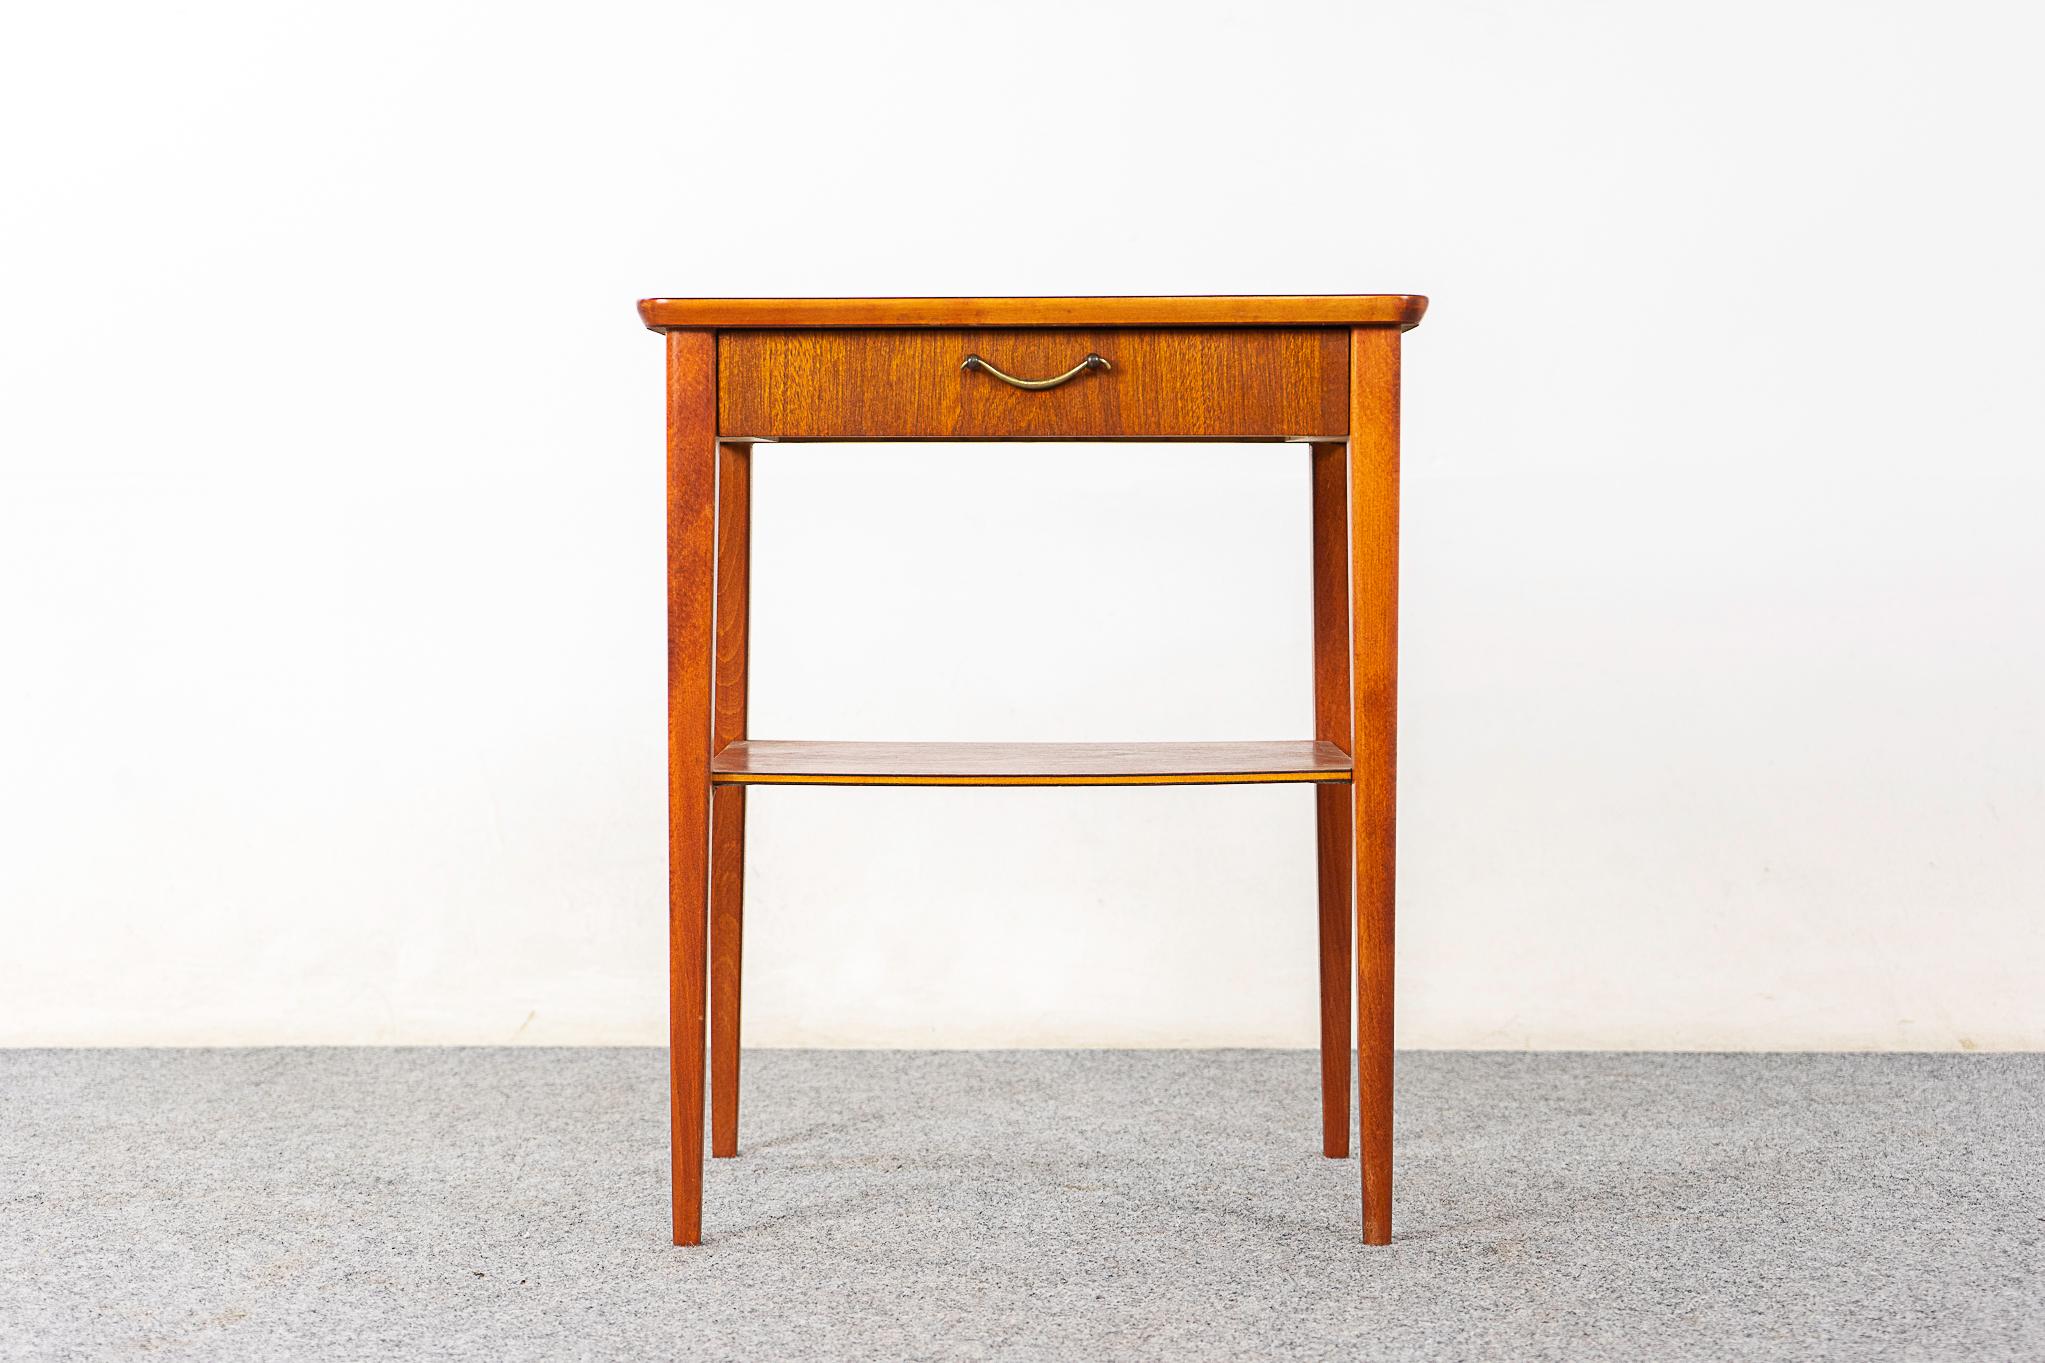 Mahogany Mid-century bedside tables, circa 1960s. Single dovetailed drawer for small essentials, lower shelf is perfect for your book on the go!

Unrestored item with option to purchase in restored condition for an additional $100 USD. Restoration